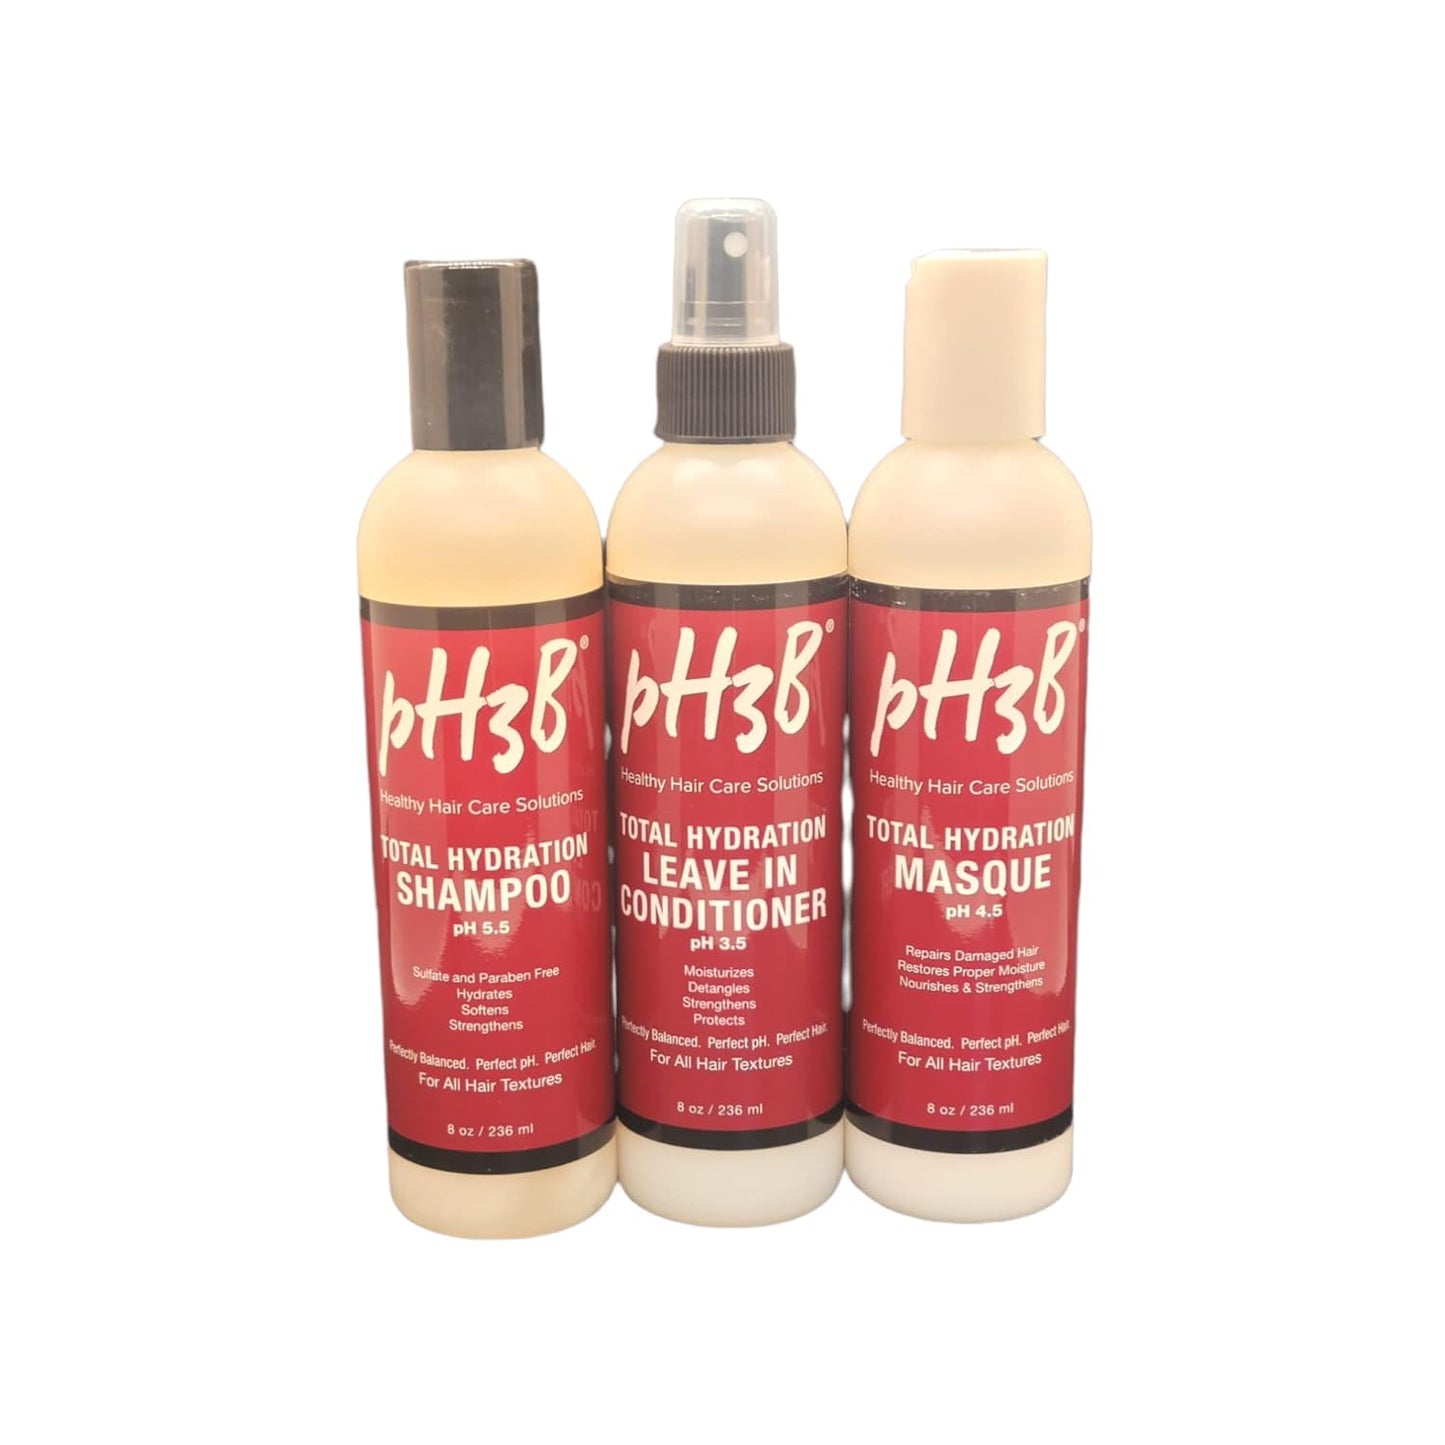 pH3B Hair Care Total Hydration Bundle Shampoo, Hair Masque Leave in Conditioner Sulfate Free Natural Ingredients Rehydrates Nourish Repair Strengthen Tames Frizz